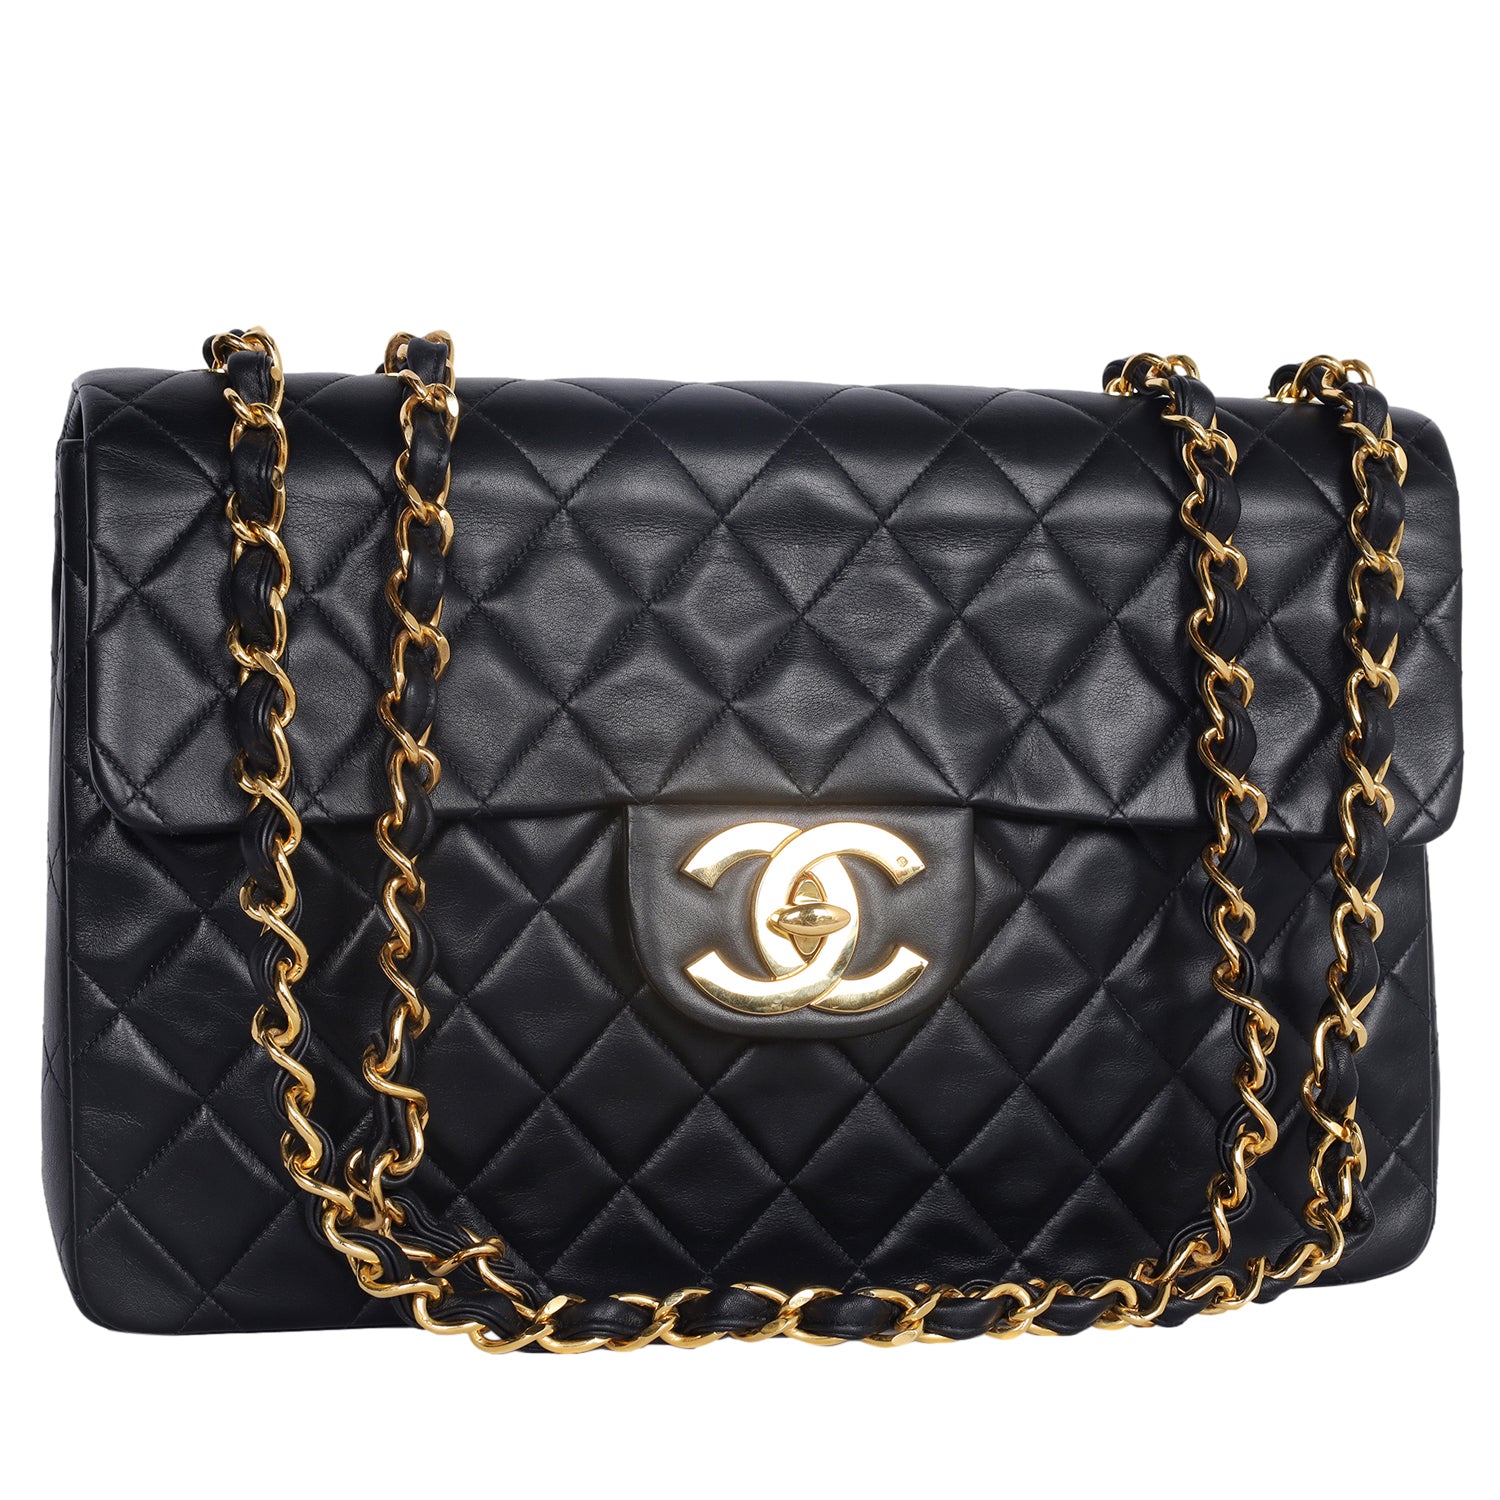 Bougie on a Budget Vintage Chanel Flap Bag  From Nubiana With Love